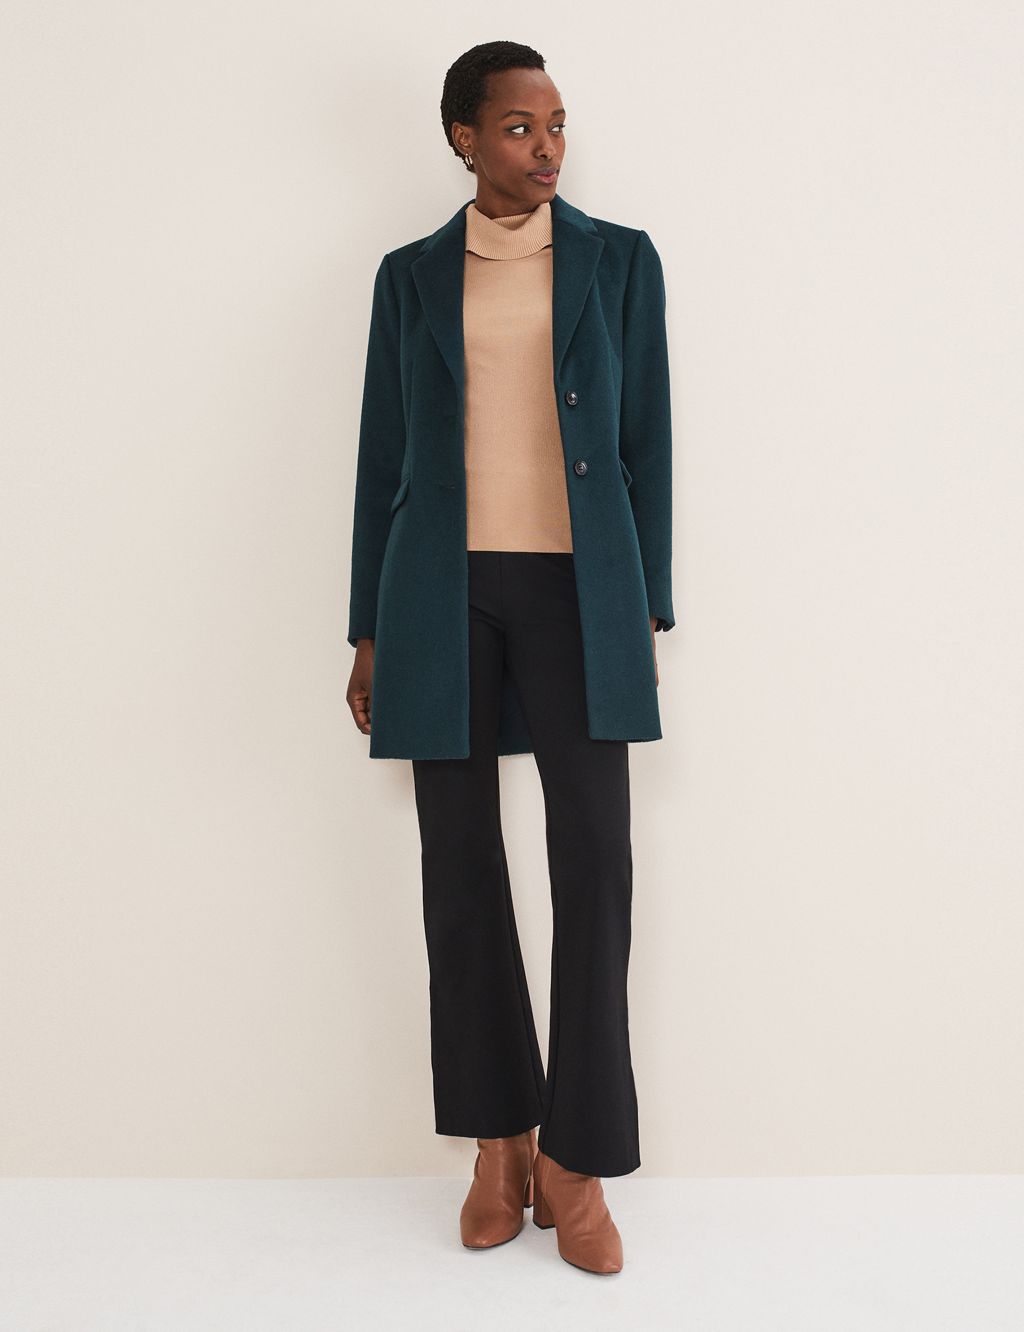 Wool Blend Collared Tailored Coat image 3